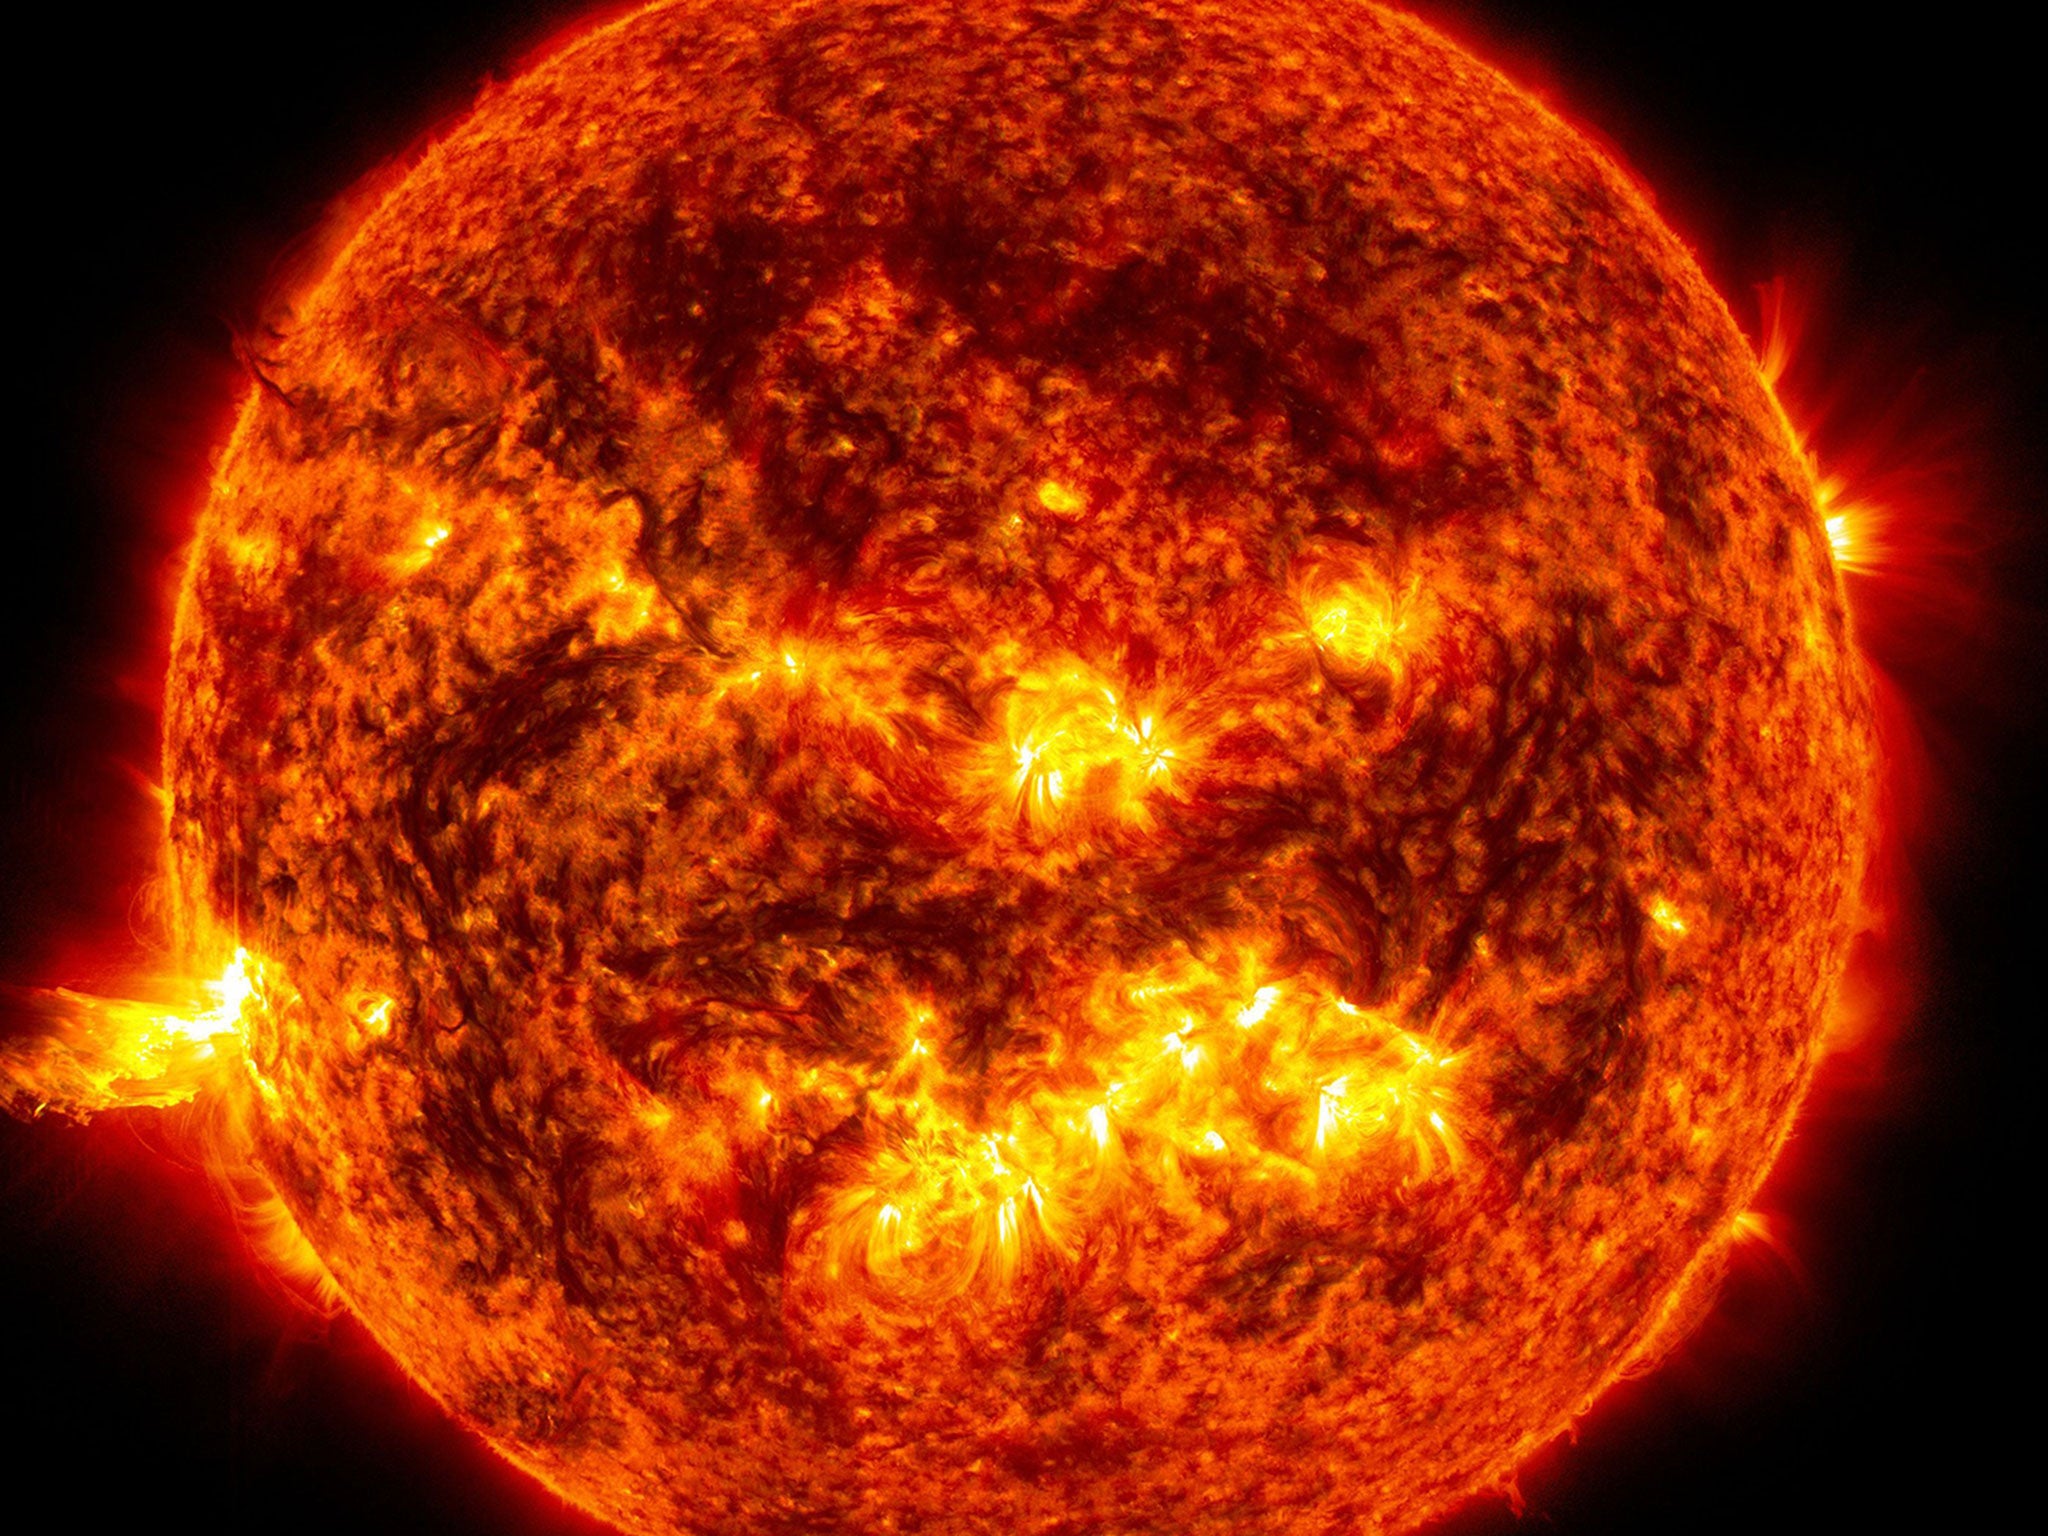 The bright light of a solar flare on the left side of the sun and an eruption of solar material shooting through the sun’s atmosphere, called a prominence eruption